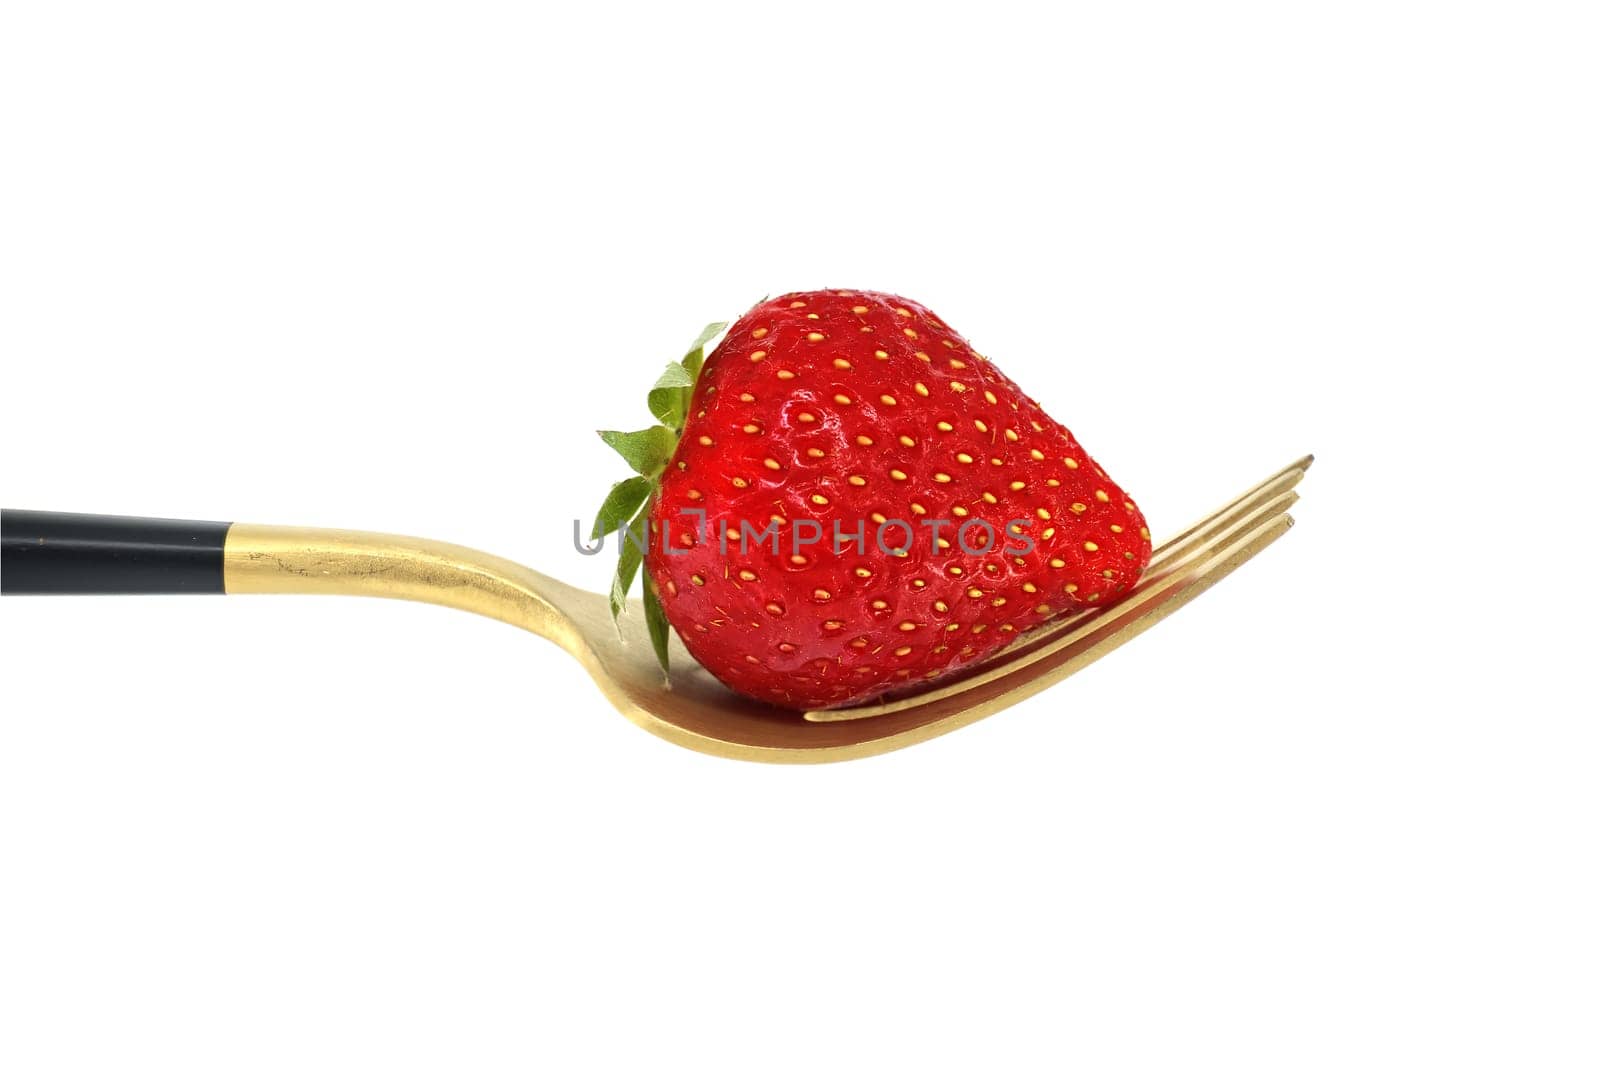 Fresh strawberry on gold fork isolated on white background by NetPix